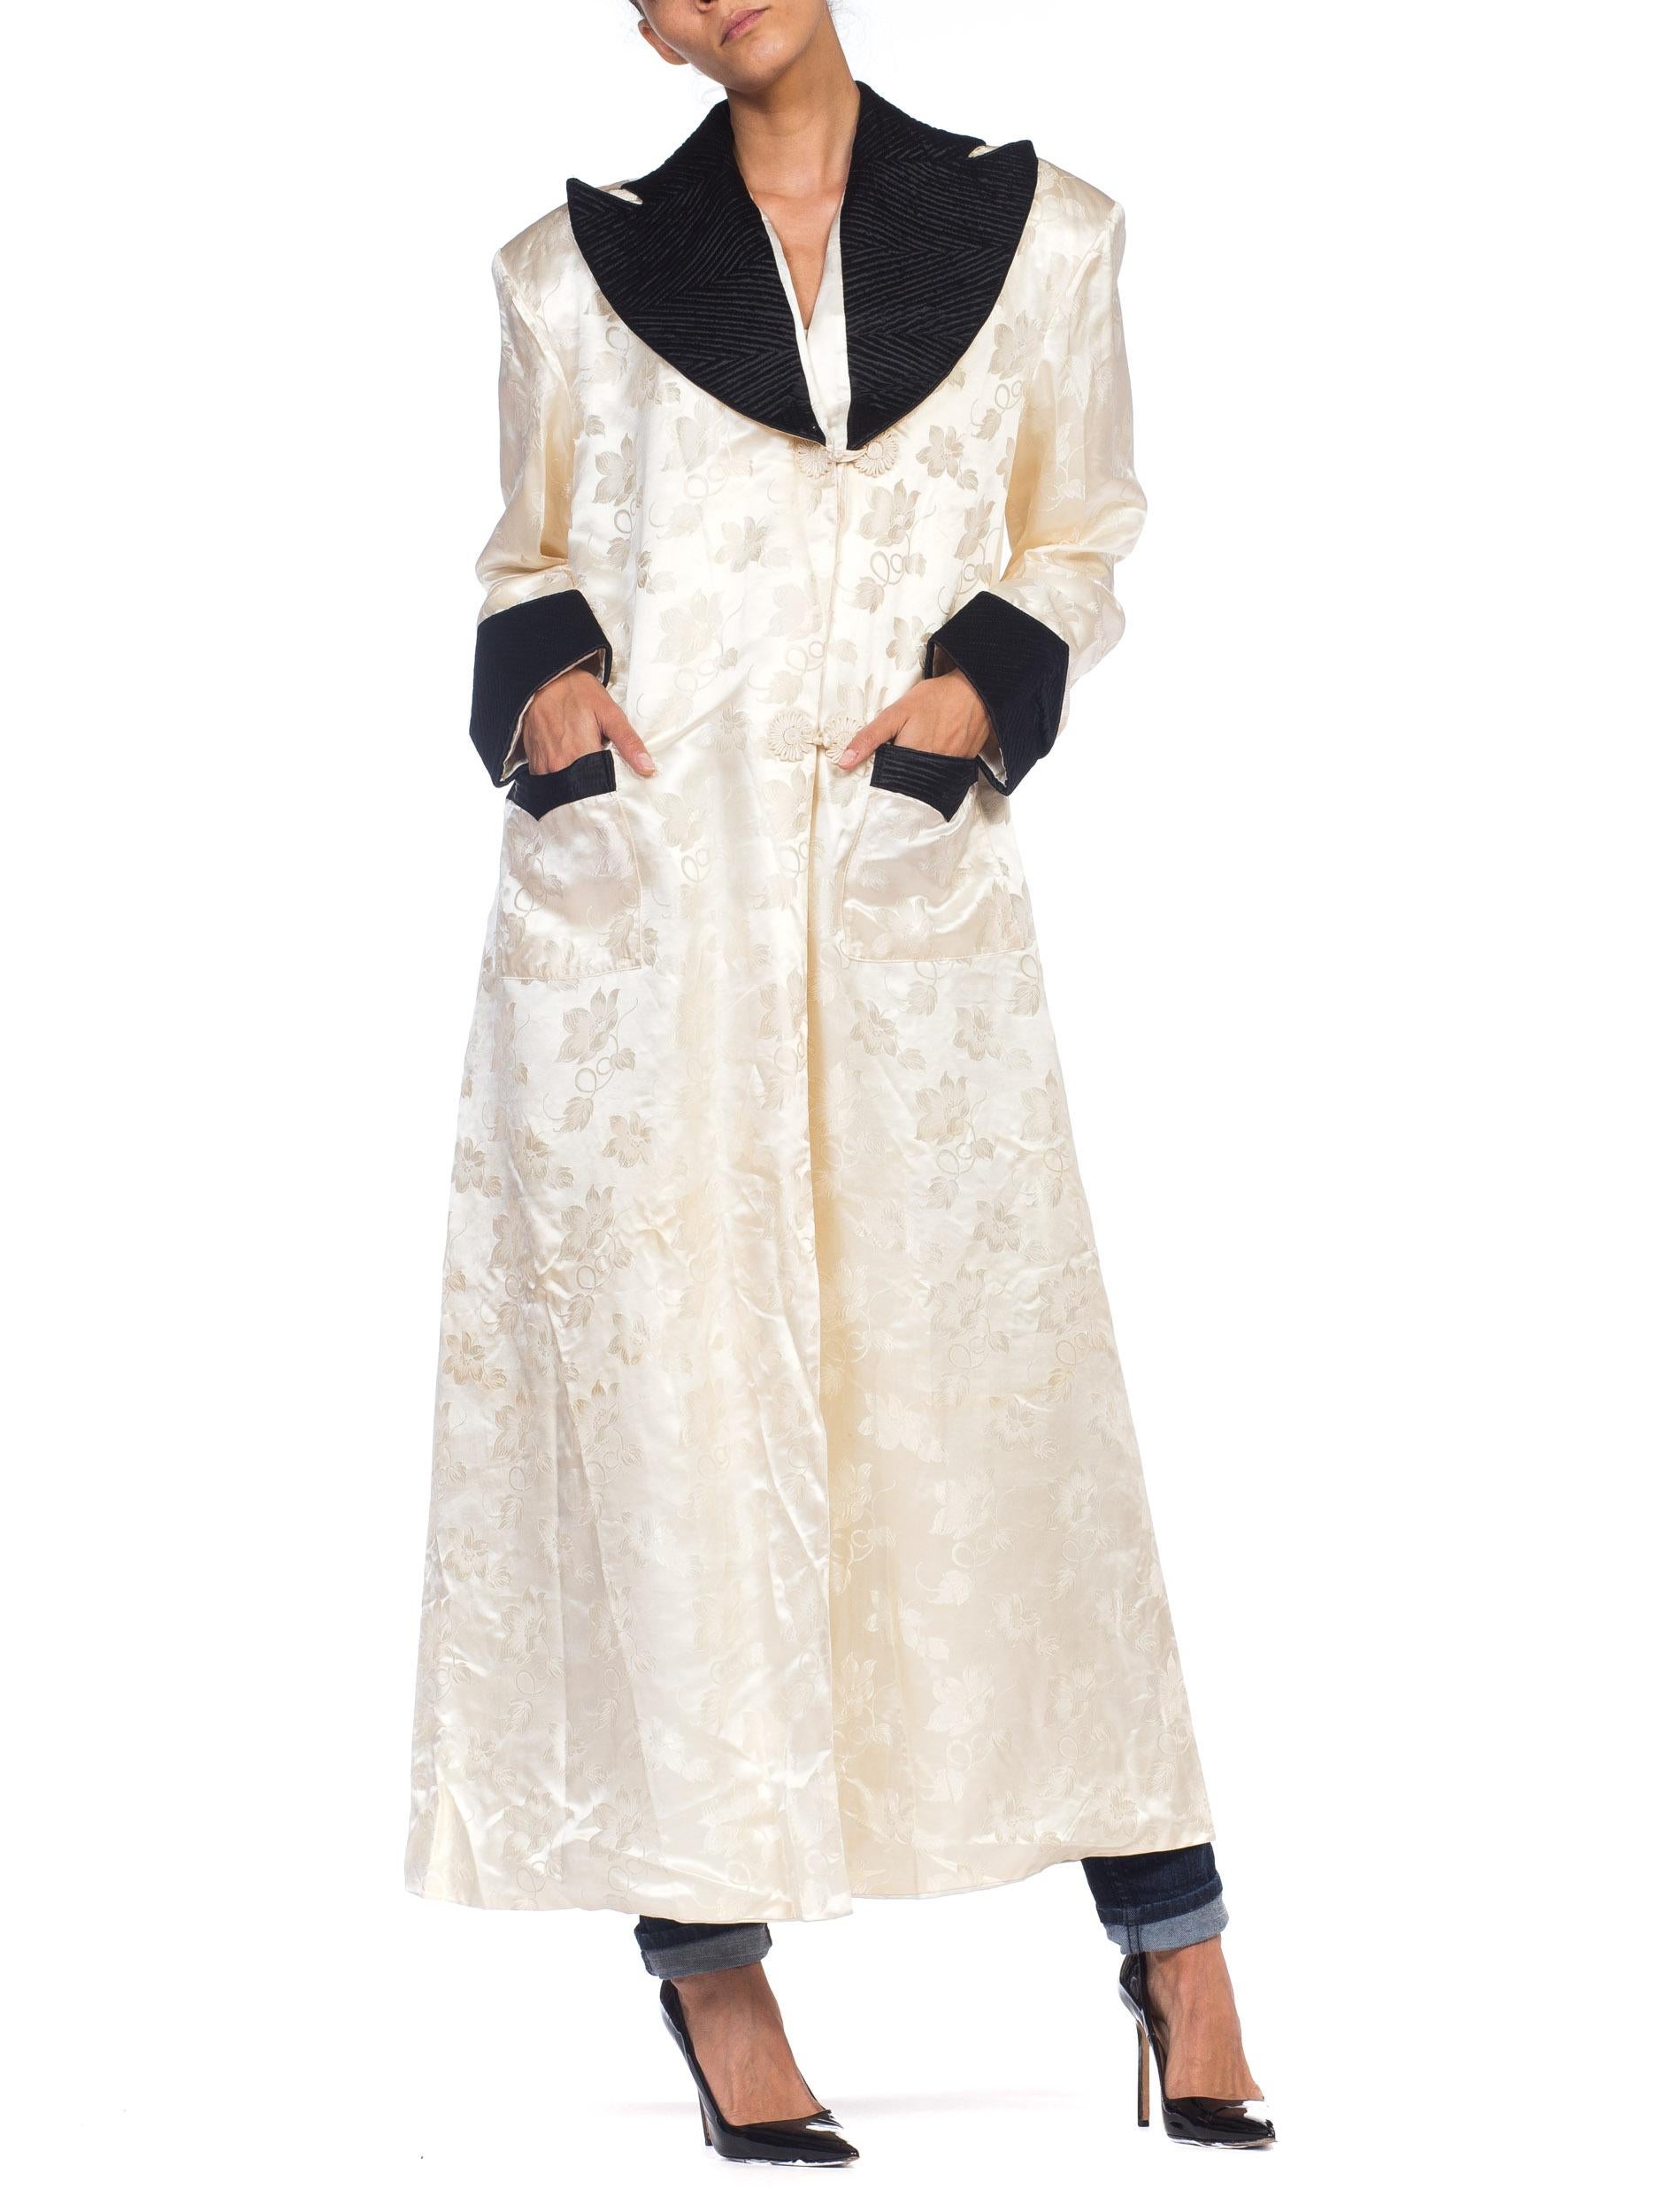 Women's 1940s White Silk Lined Dressing Gown